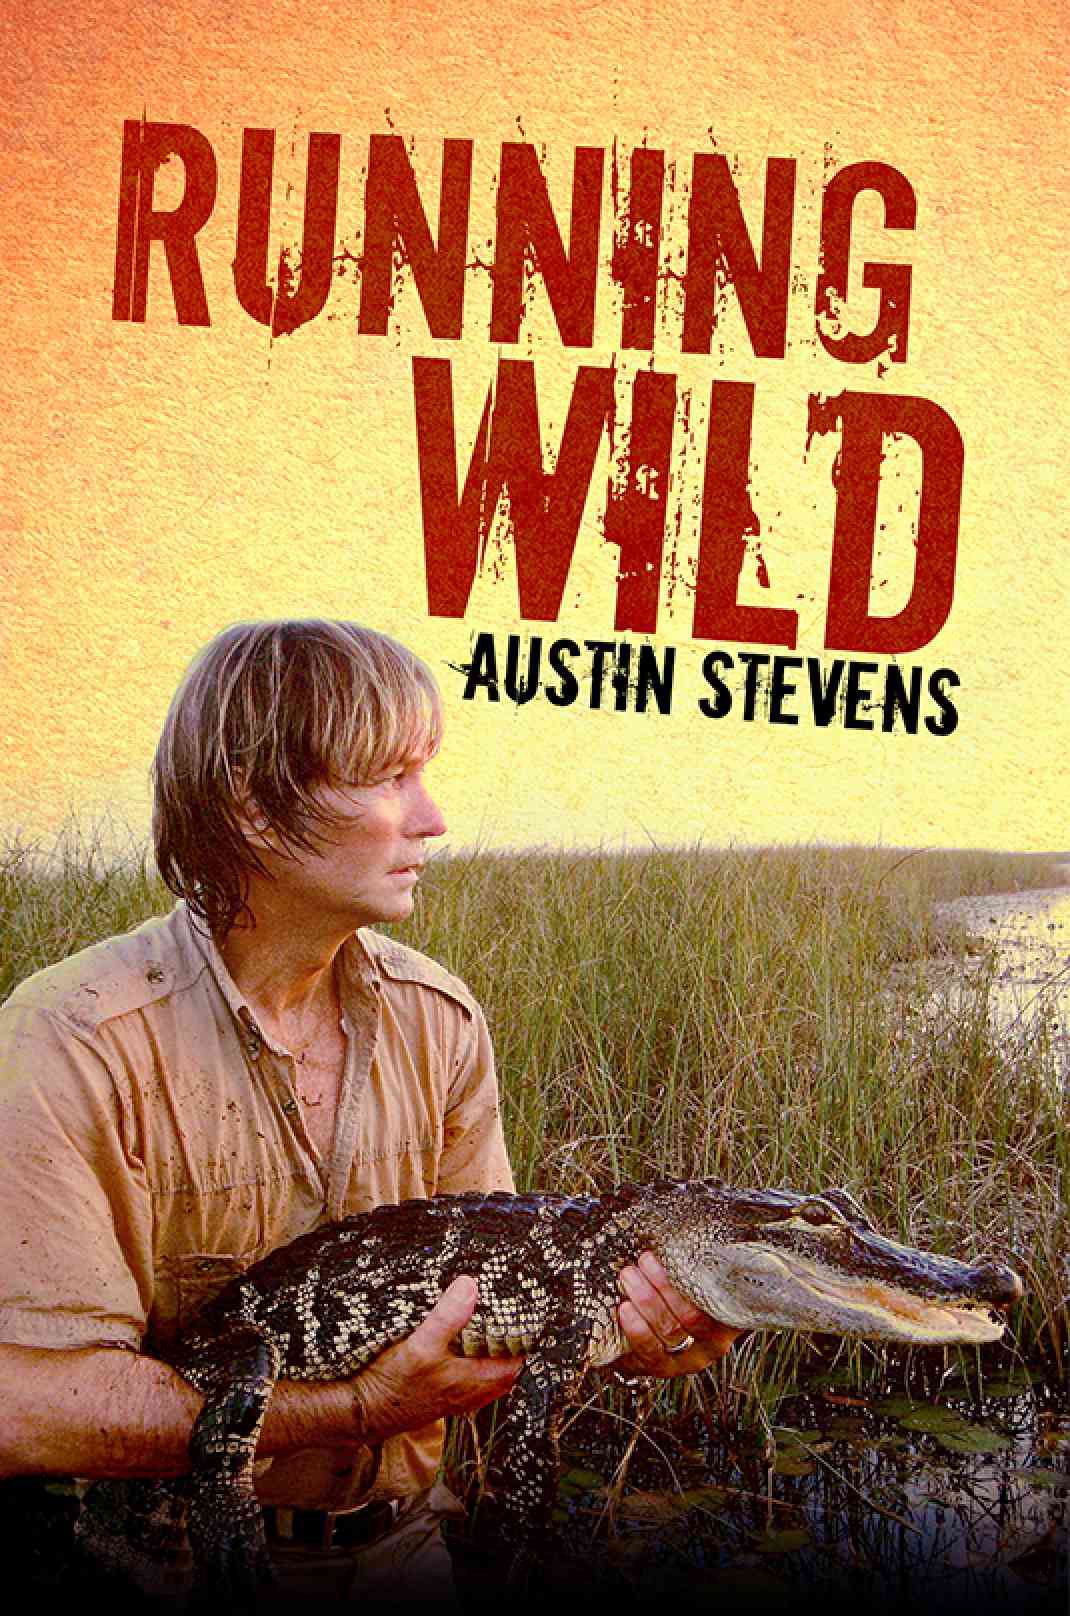 Fupping.com Featured the Renowned Photographer and Author Austin Stevens’s Book Running Wild